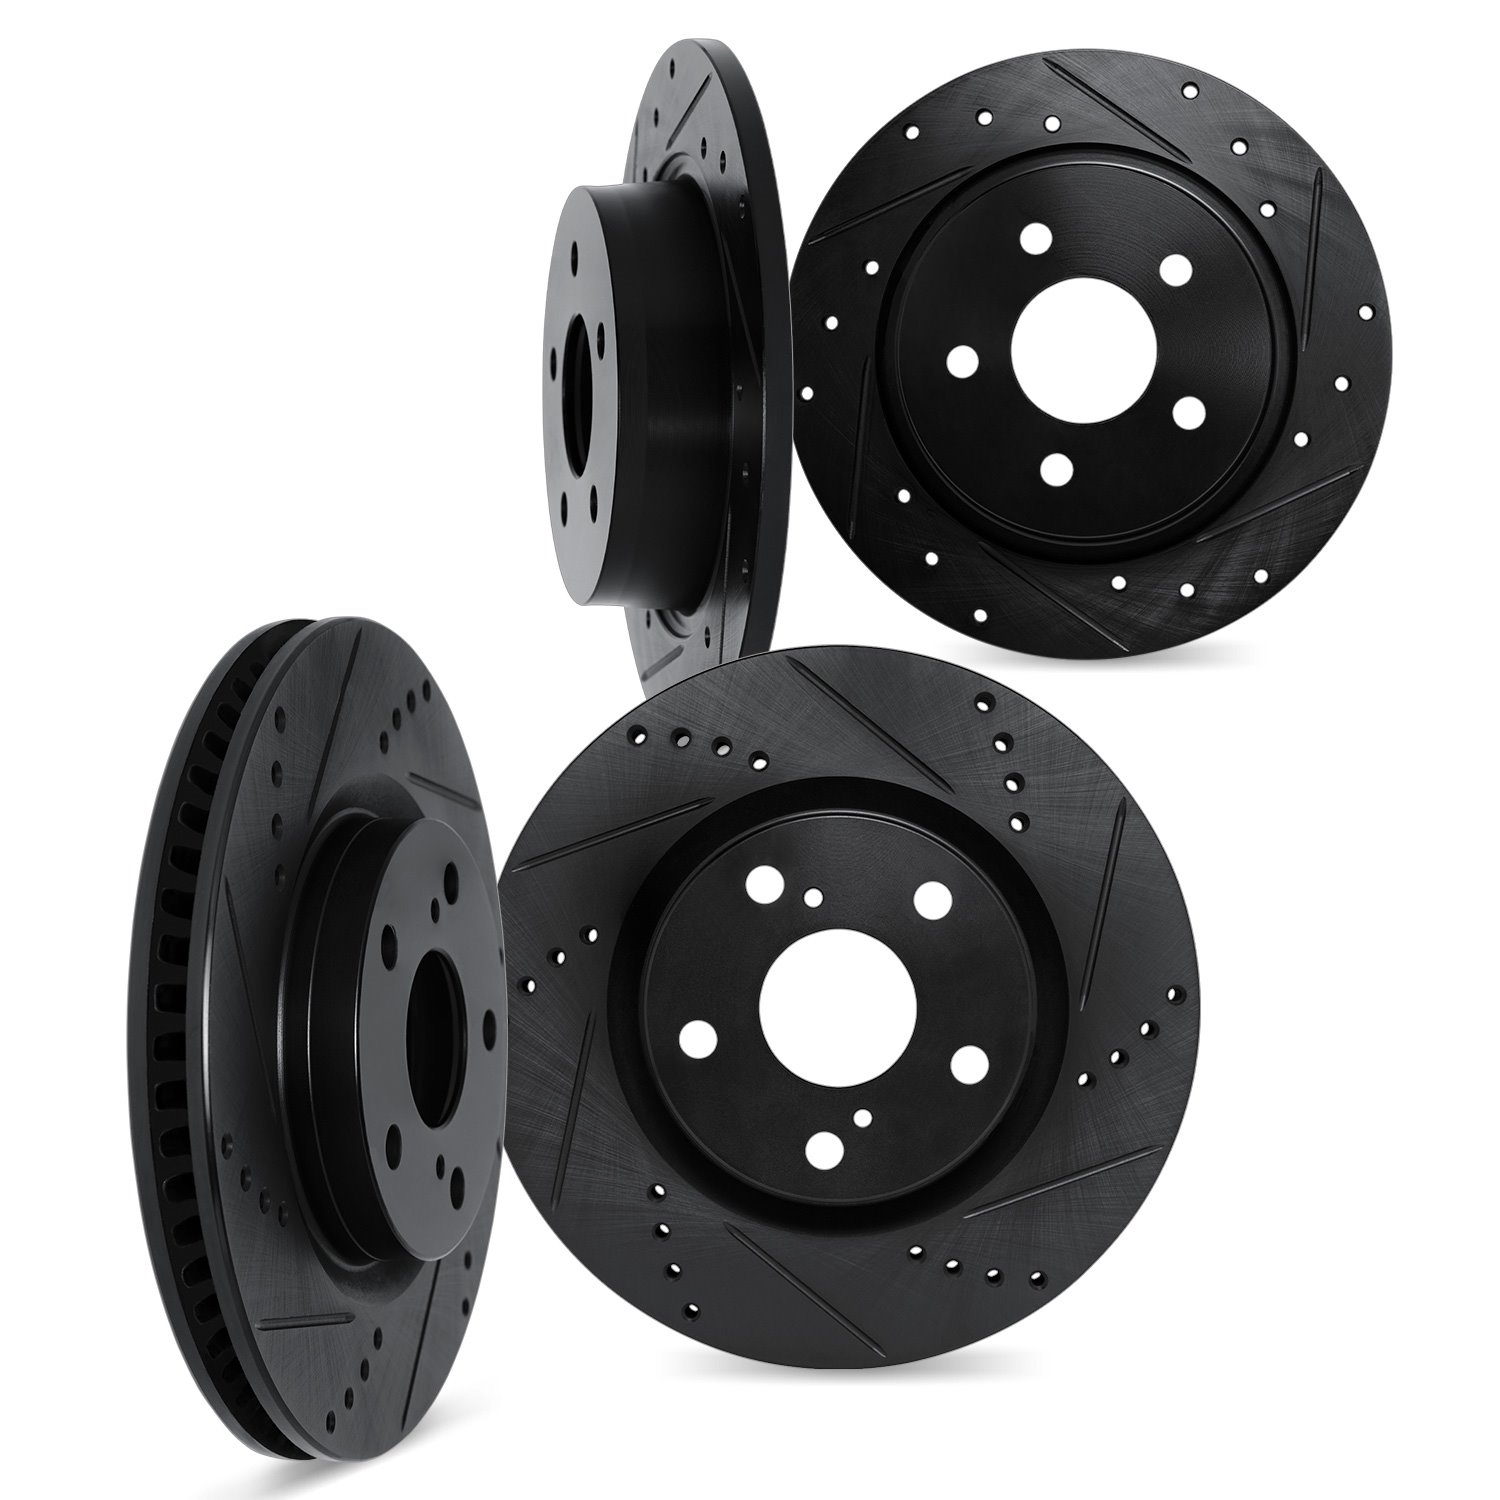 8004-76074 Drilled/Slotted Brake Rotors [Black], Fits Select Lexus/Toyota/Scion, Position: Front and Rear